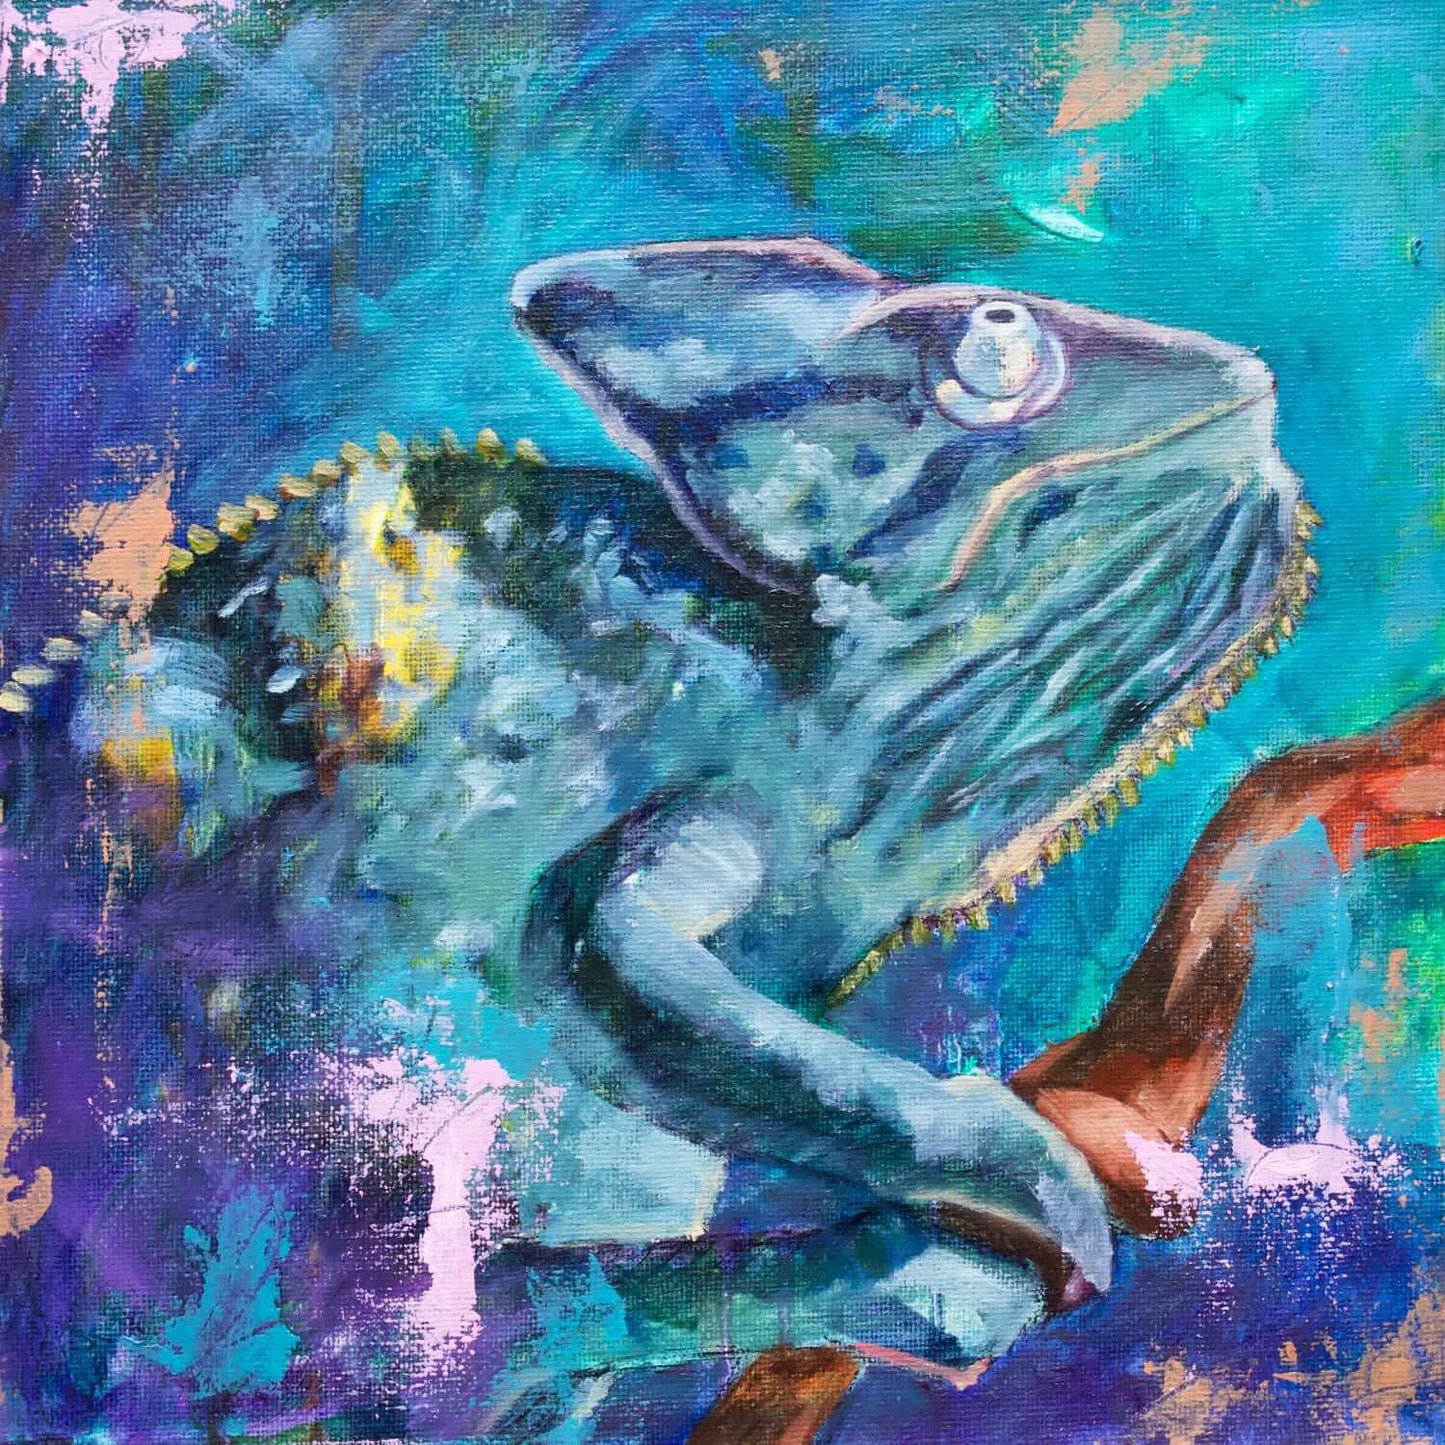 Original Oil Painting of a Chameleon, Blue & Green, 10" x 10" Painting on Canvas